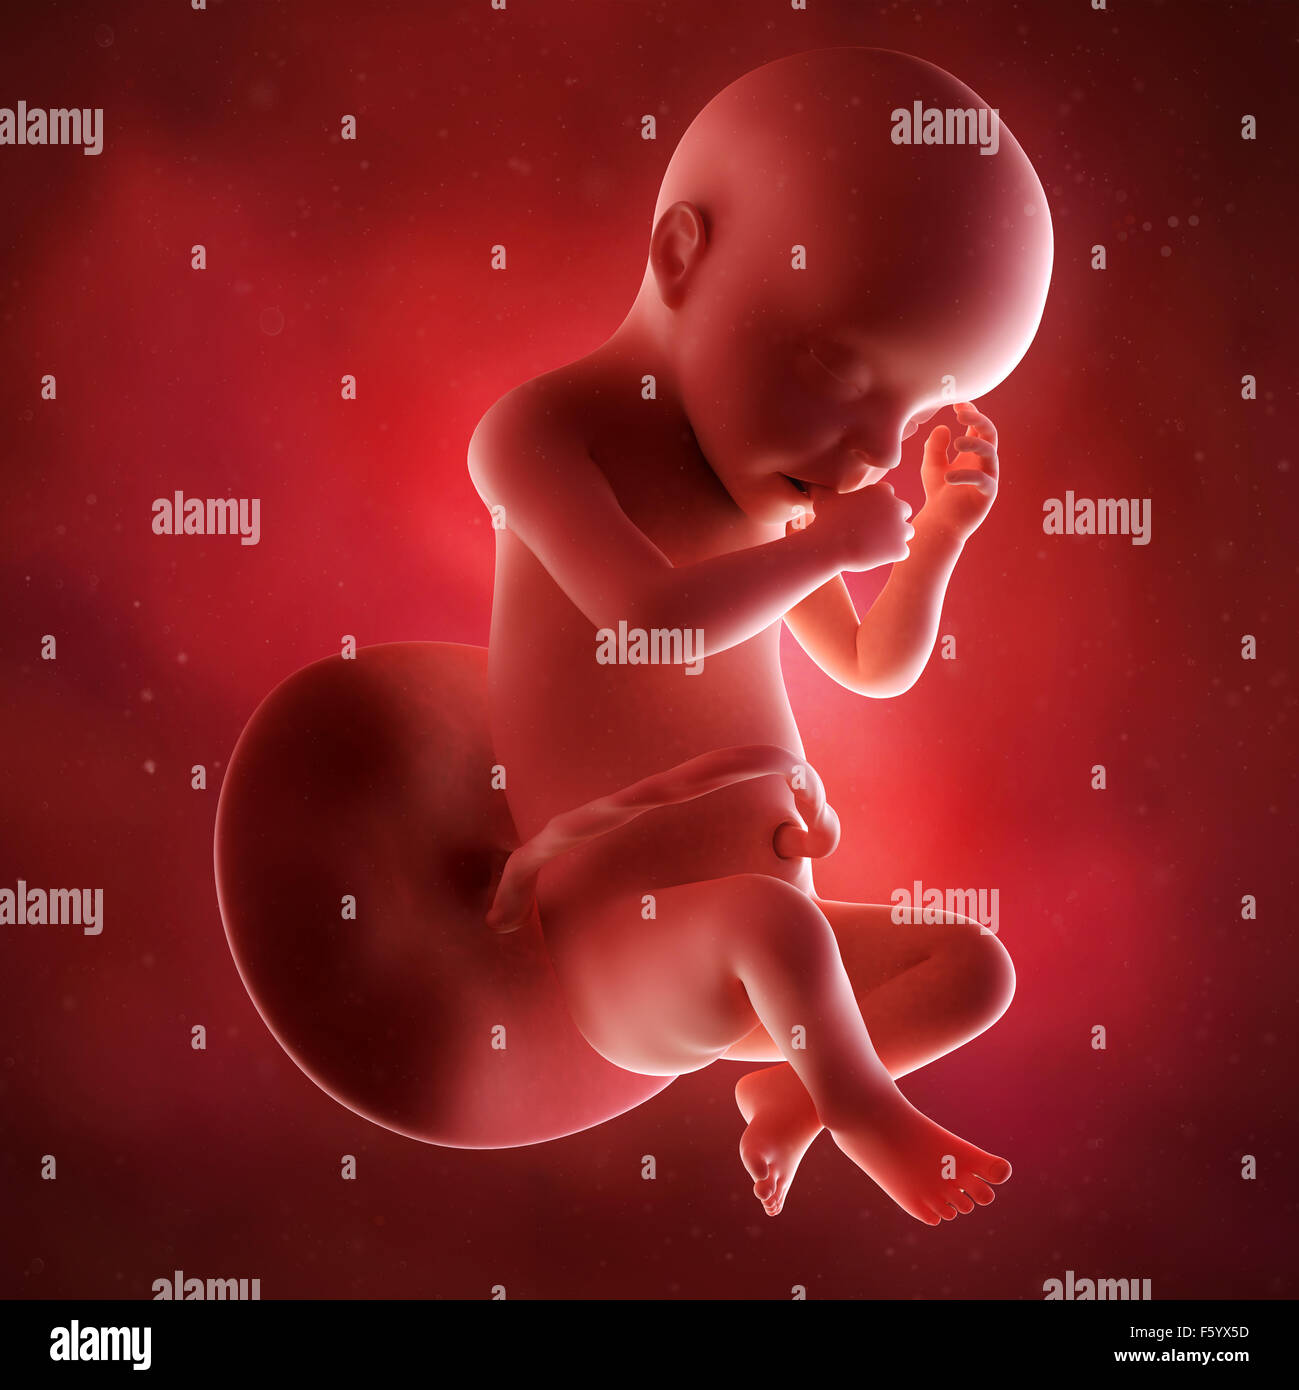 medical accurate 3d illustration of a fetus week 30 Stock Photo